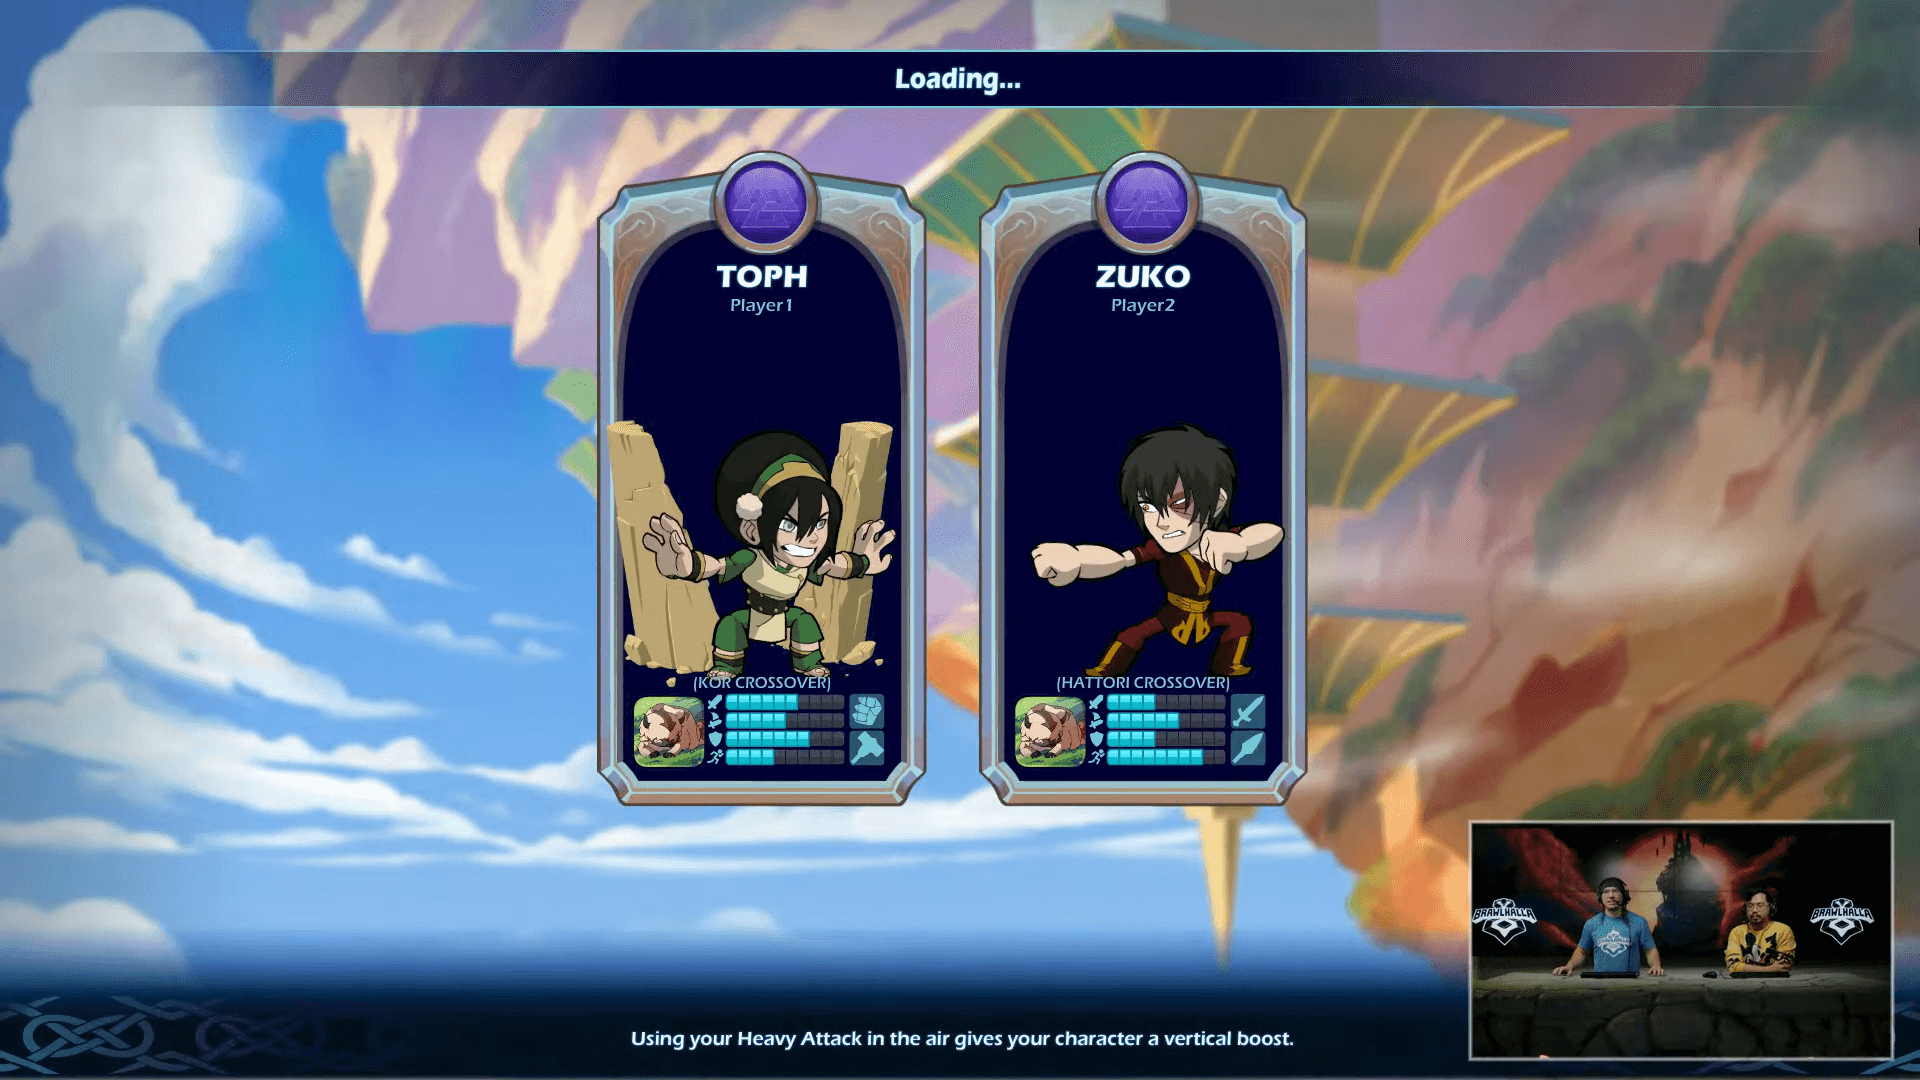 A Closer Look at Avatar Crossover Skins in Brawlhalla